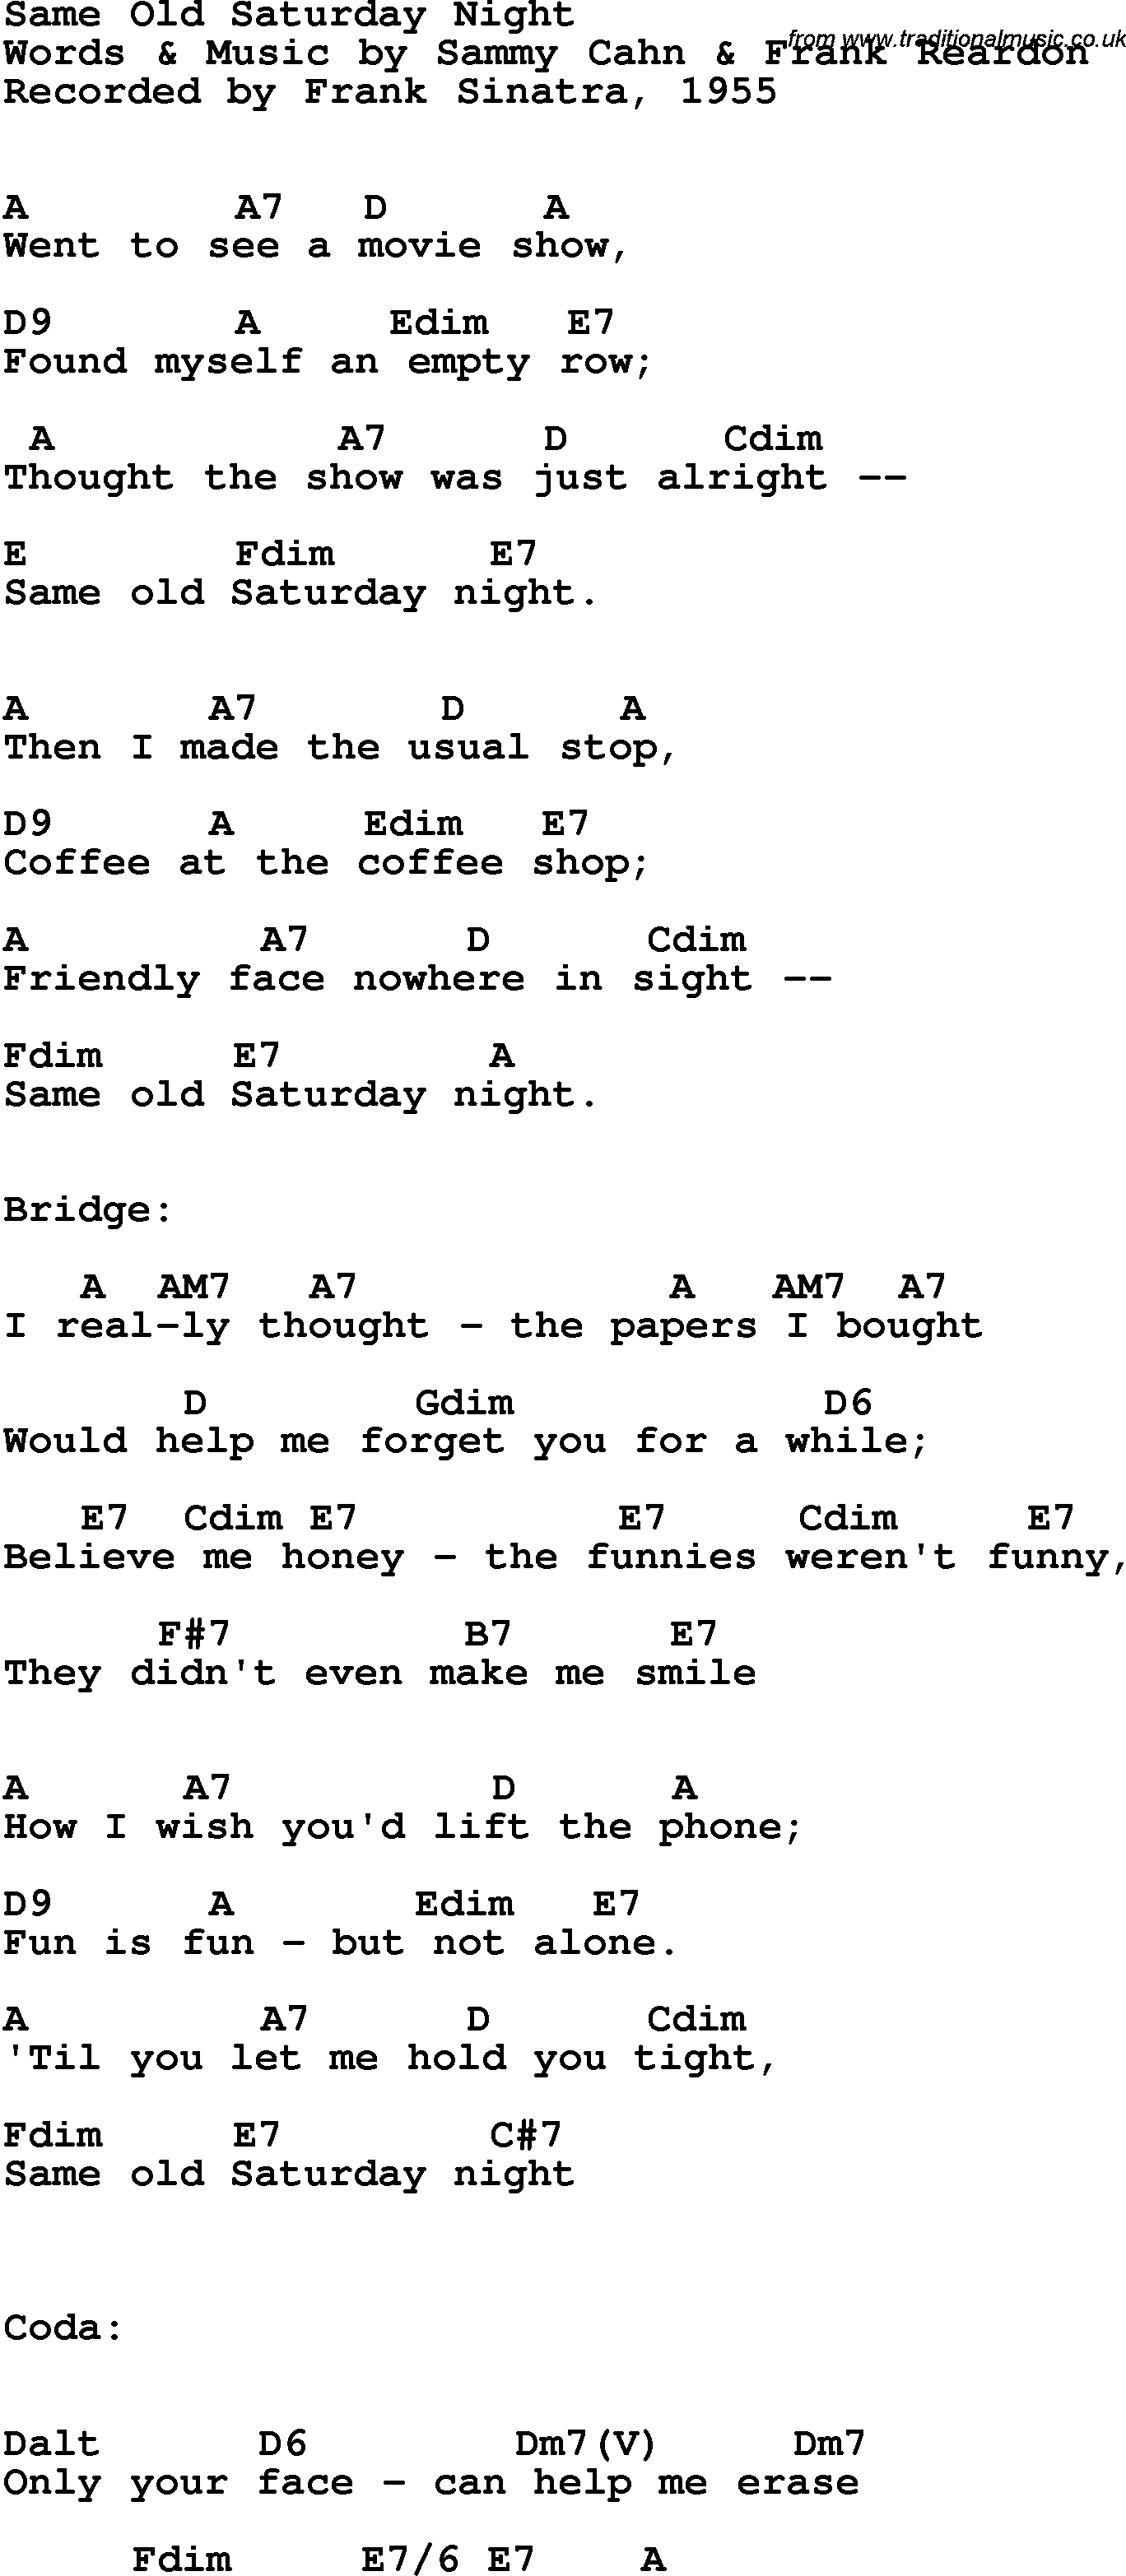 Song Lyrics with guitar chords for Same Old Saturday Night - Frank Sinatra, 1955